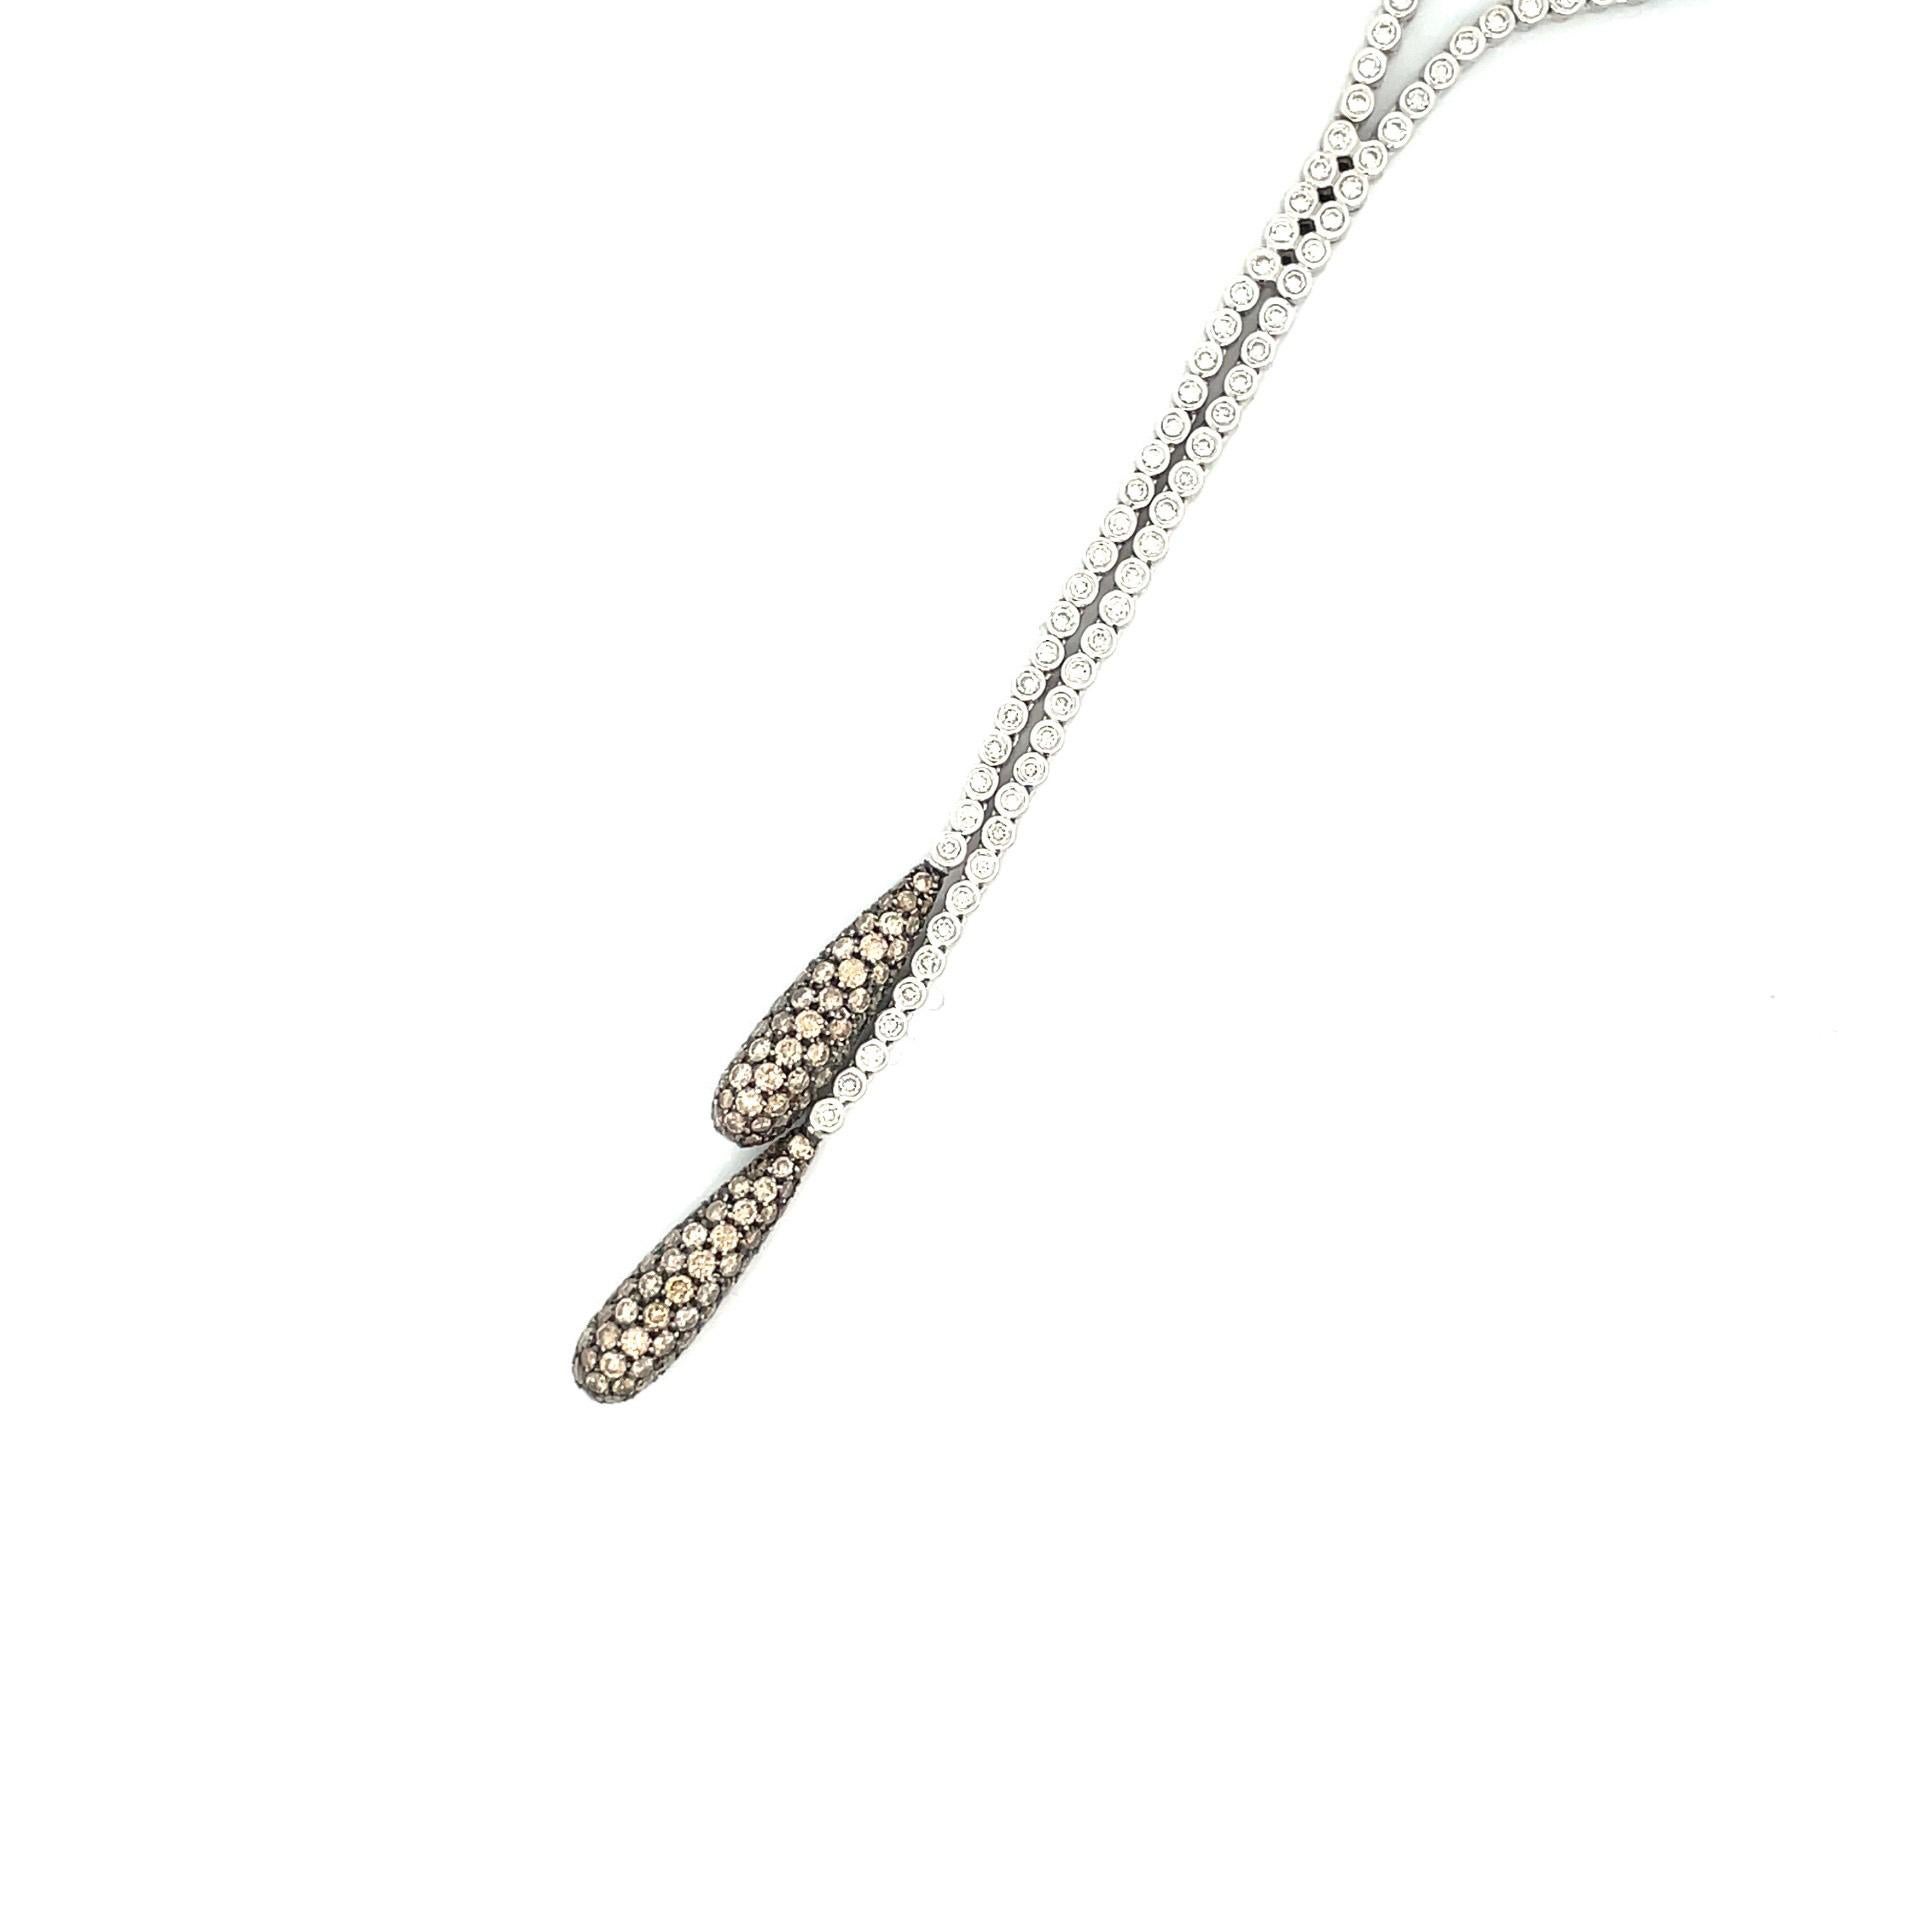 Enjoy this double pave drop pear shape necklace 18 kt white gold with natural white diamonds &  black rhodium finish around natural brown diamonds.

112 brilliant cut natural white diamonds 1.75ct total weight

143 brilliant cut natural brown